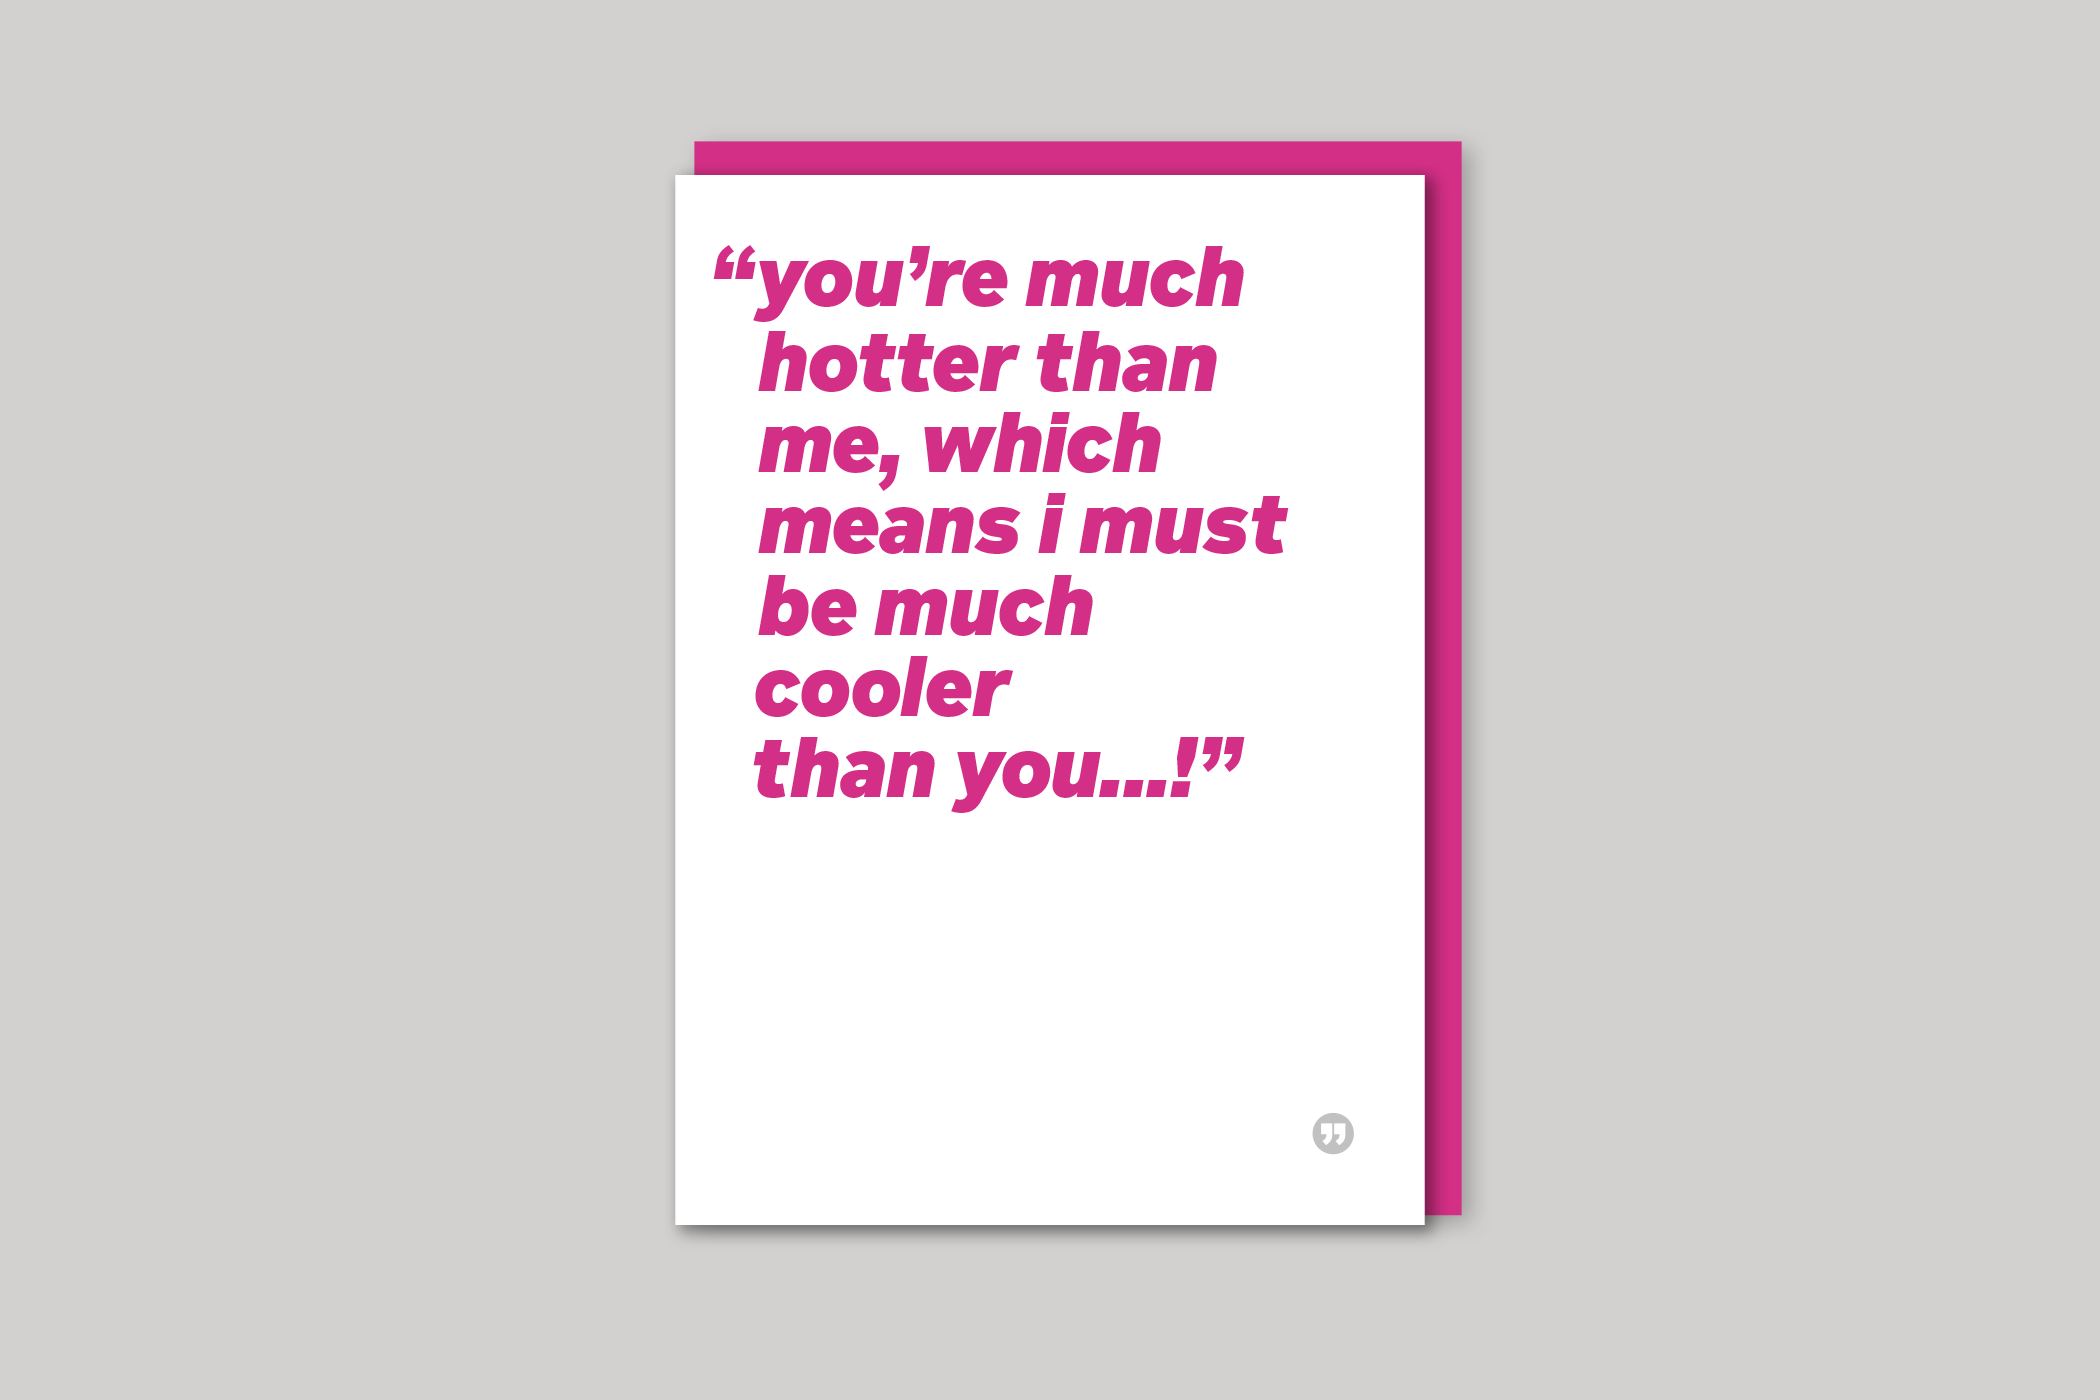 Hotter Than Me funny quotation from Quotecards range of cards by Icon, back page.